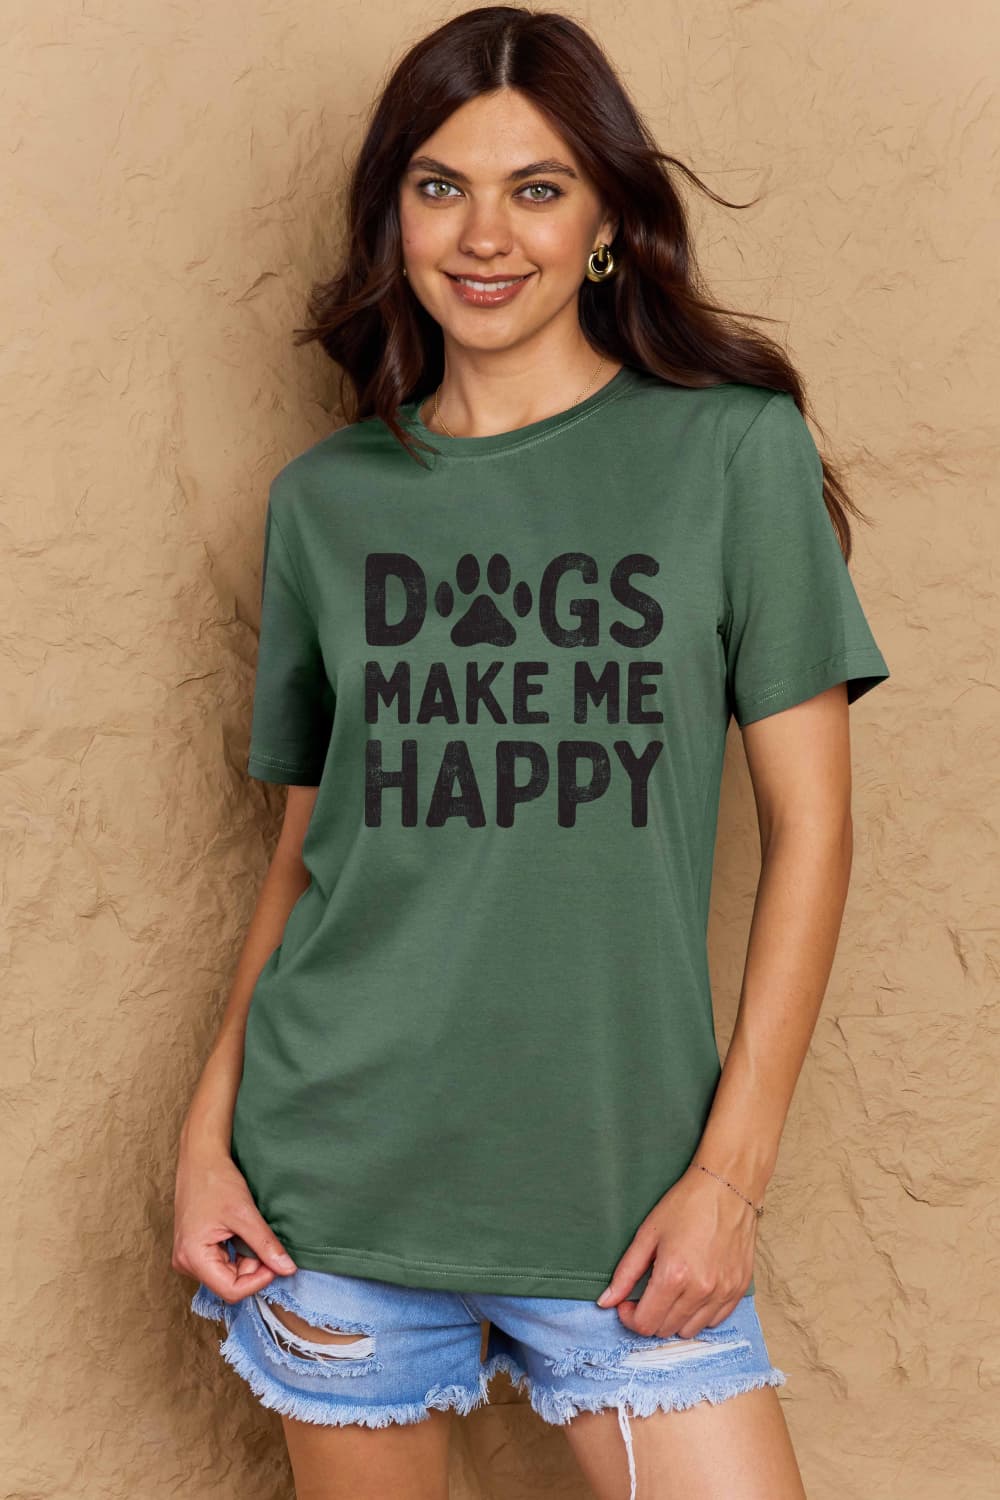 Full Size DOGS MAKE ME HAPPY Graphic Cotton T-Shirt